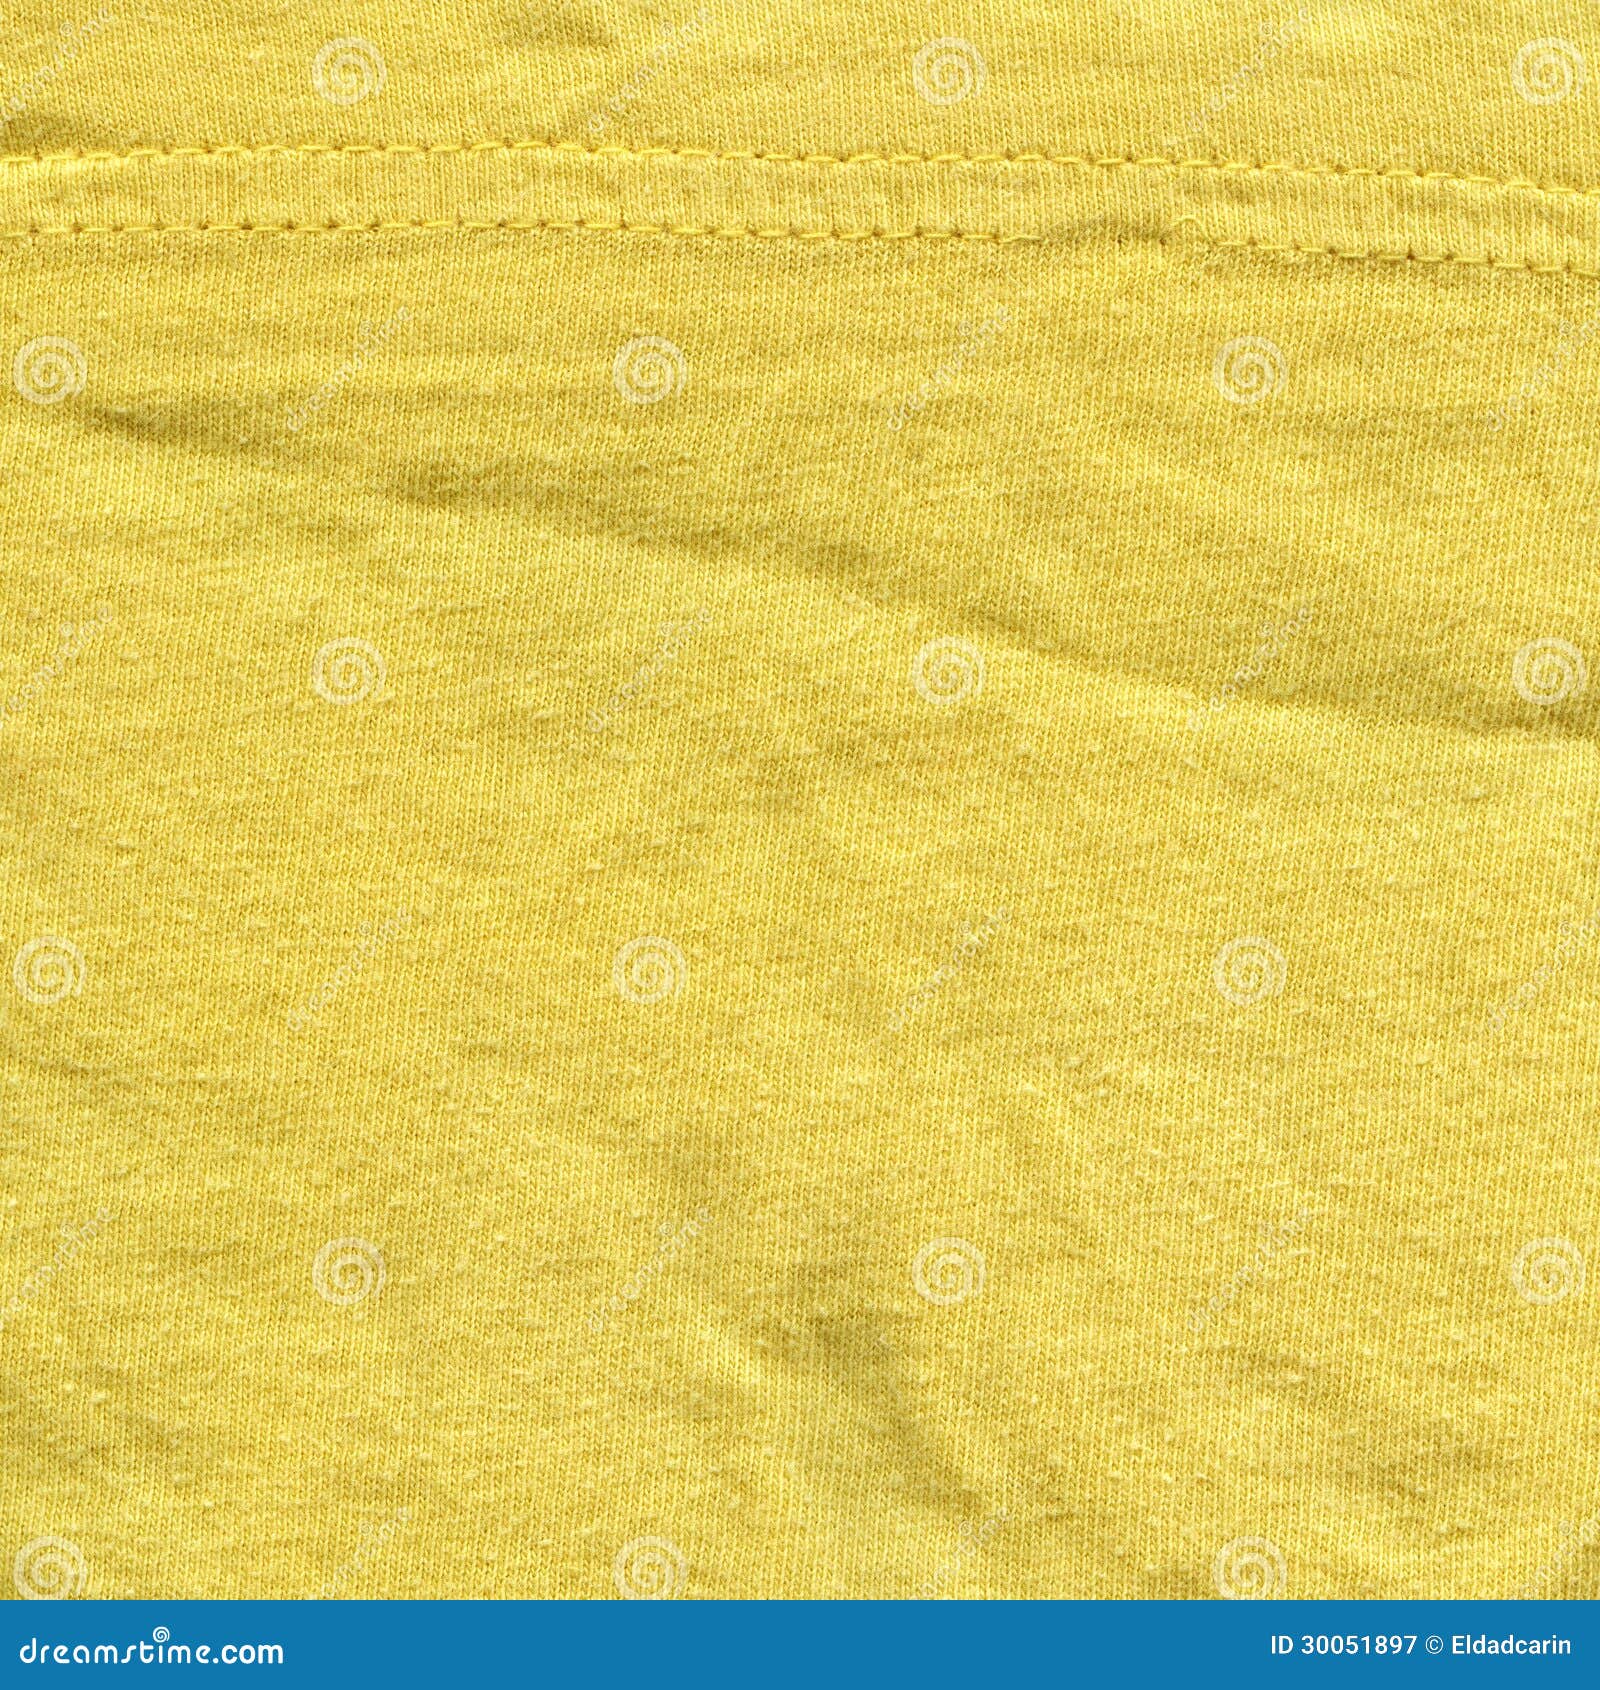 Cotton Fabric Texture - Bright Yellow with Seams Stock Image - Image of ...